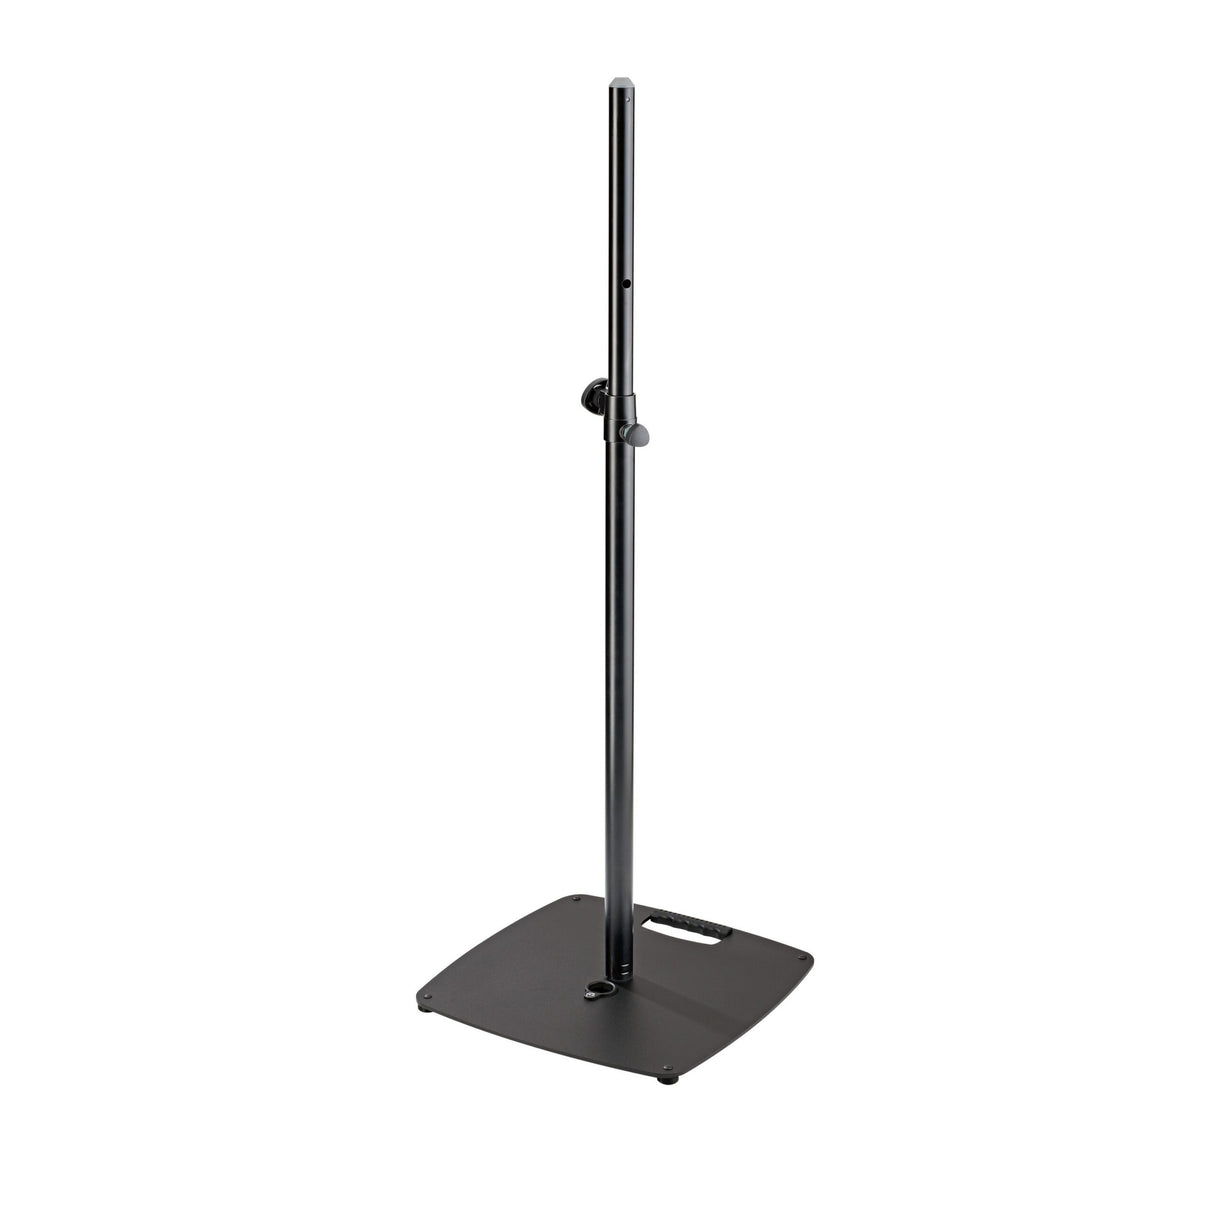 K&M 26734 Spring Loaded Speaker Stand with Flat Base Plate, Black